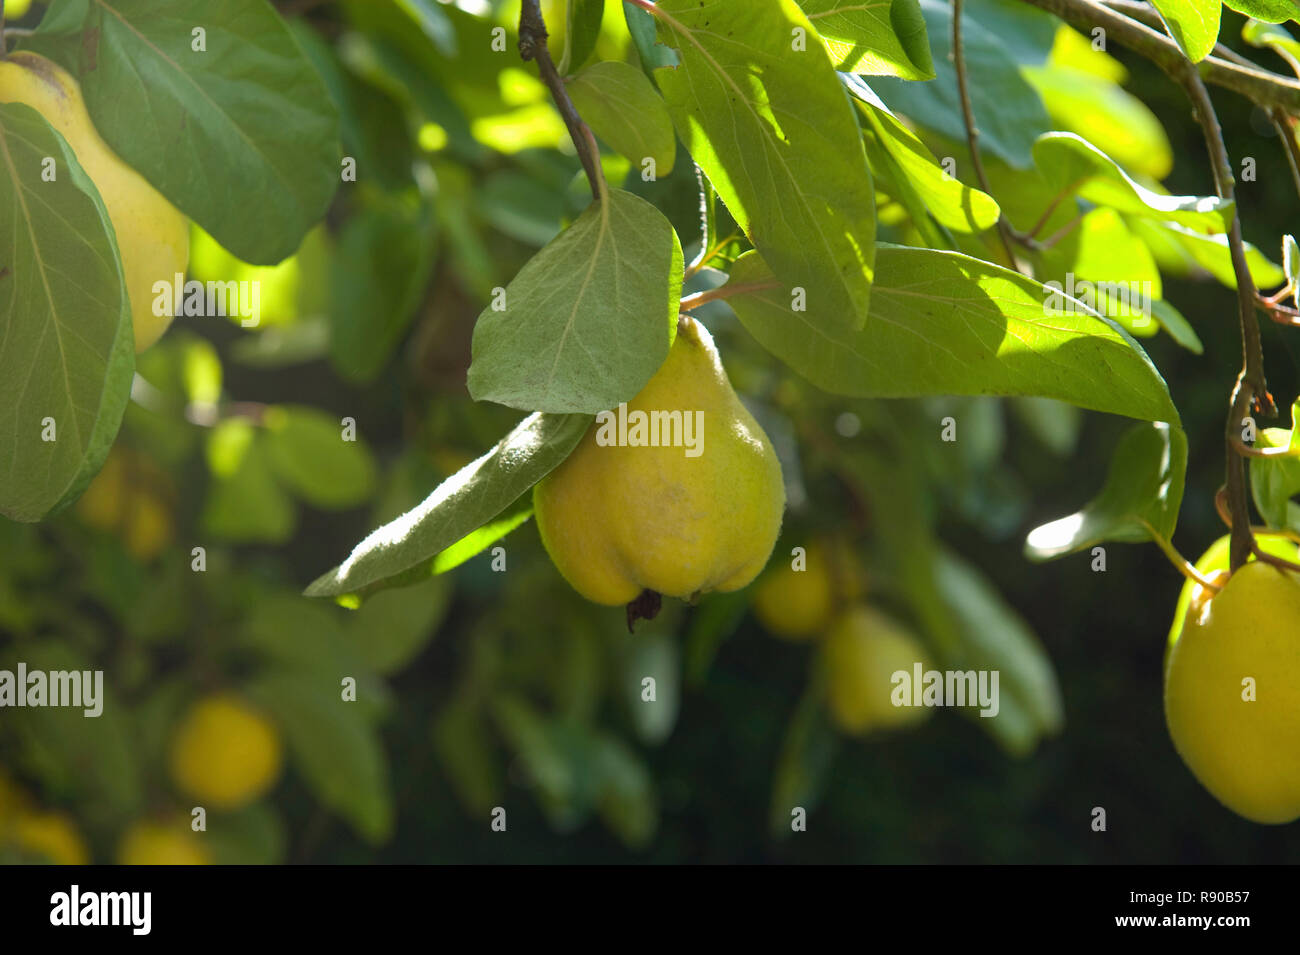 Pears growing on a tree, large yellow variety ready for harvest. Stock Photo